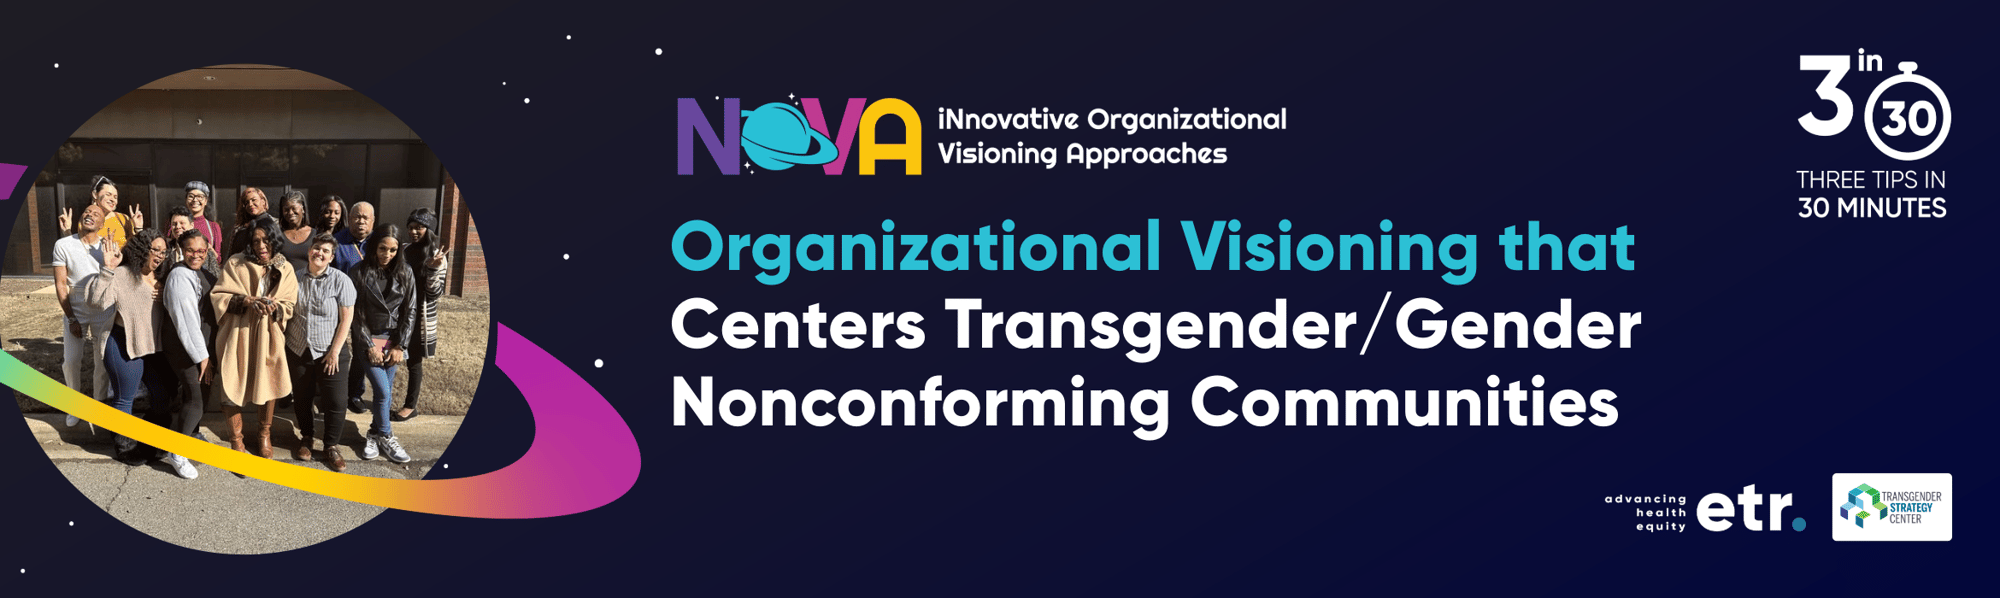 This is a dark blue header with a Saturn shaped frame on the left side of the graphic. In the frame is an image of the NOVA team posing together. Centered on the header is the NOVA logo. Within the logo it reads, “iNnovative Organizational Visioning Approaches.” Below the logo in white and blue text it reads, “Organizational Visioning that Centers Transgender/Gender Nonconforming Communities.” To the right of the text is the 3 in 30 logo that reads, "3 in 30 THREE TIPS IN 30 MINUTES".  Below the logo is the ETR logo and the Transgender Strategy Center logo.